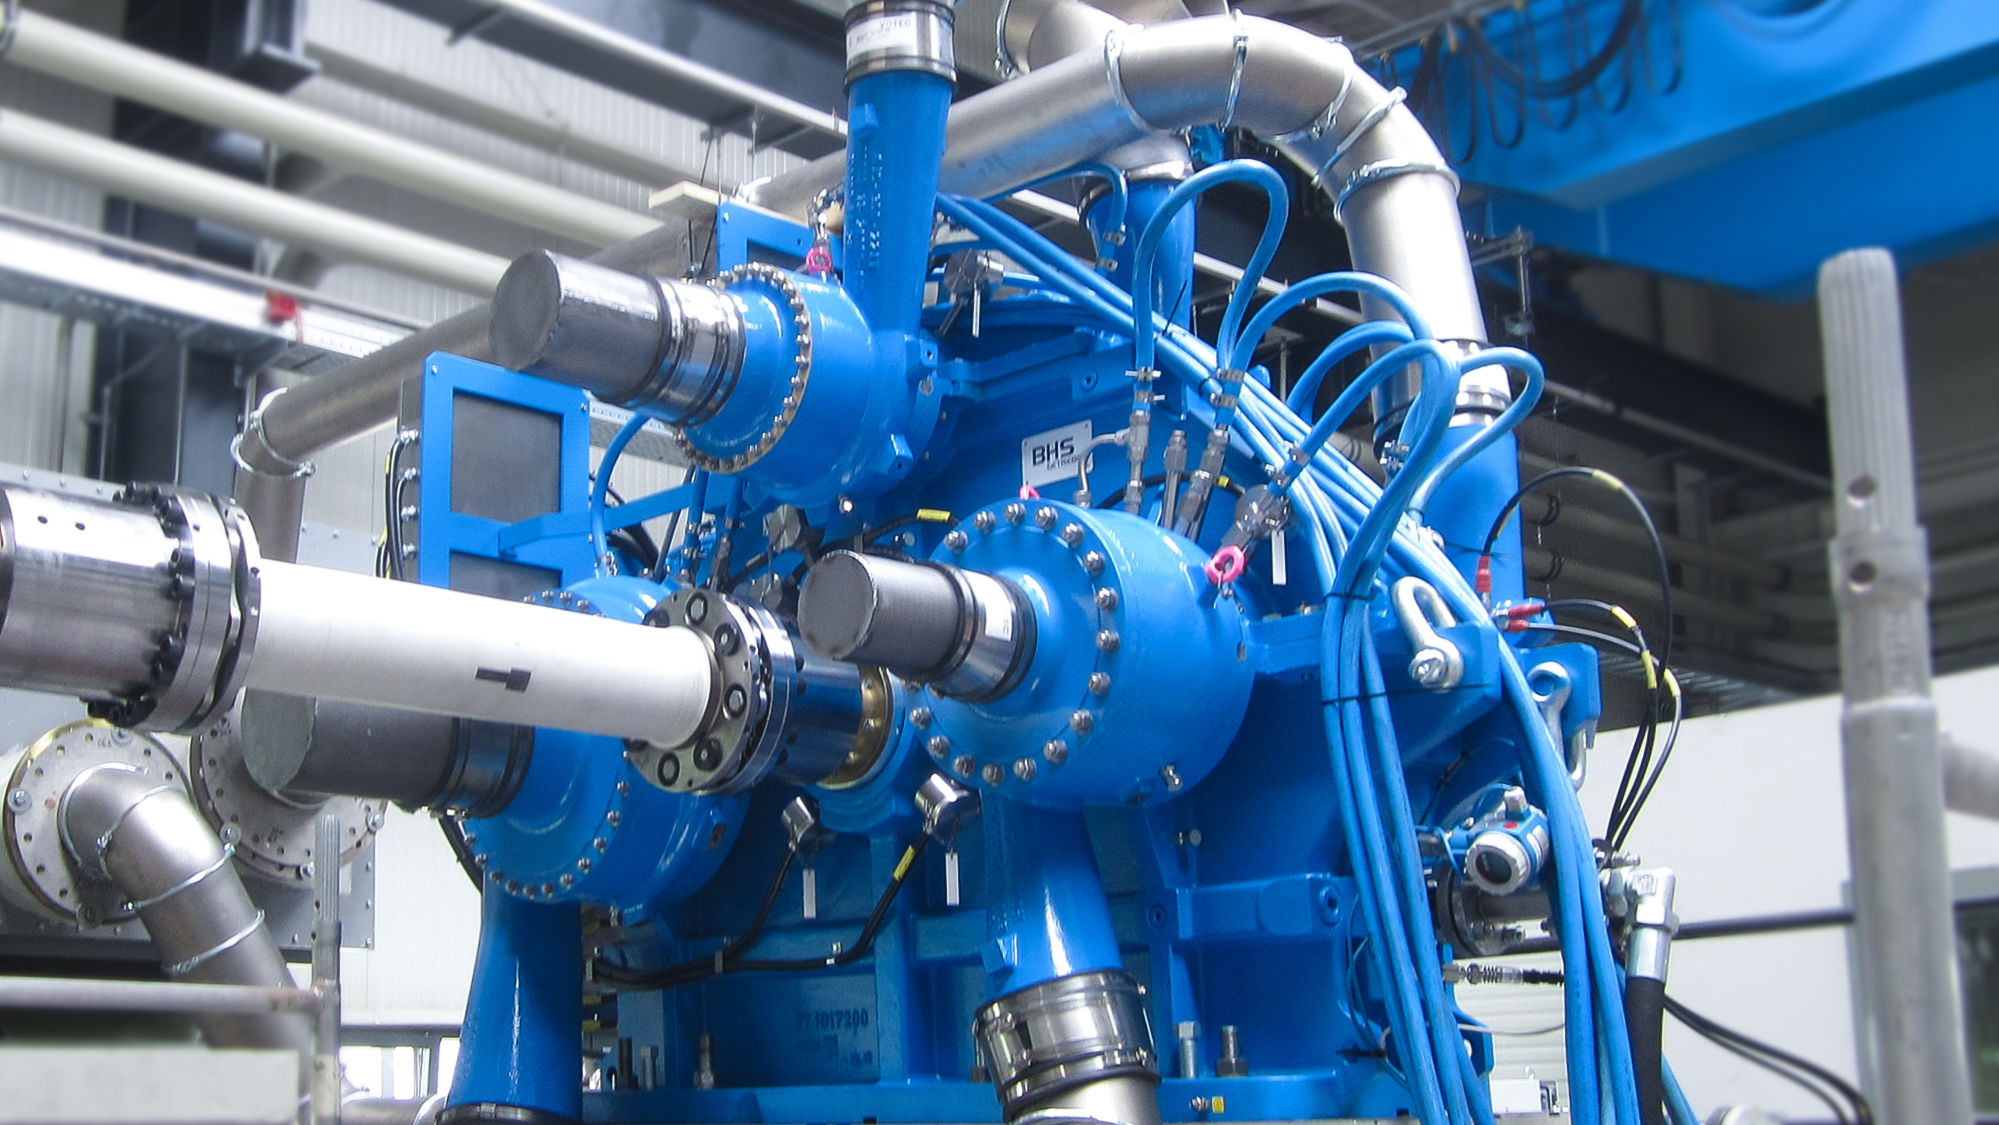 Shown is a blue integrally geared cntrifugal compressor with gray process gas lines on the test field.